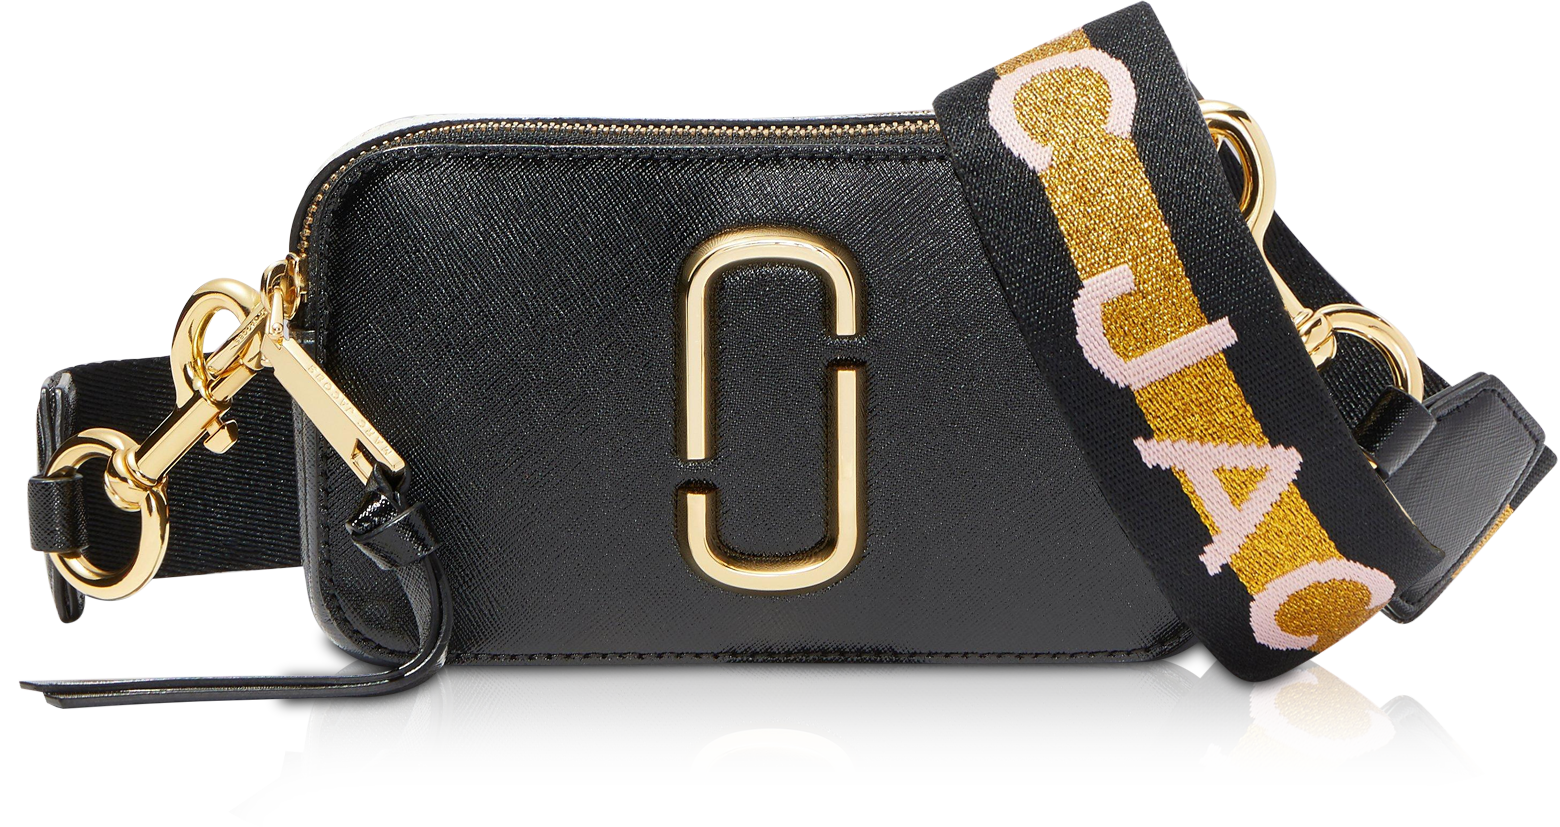 THE Logo Strap Snapshot Small Camera Bag Marc Jacobs in New Black